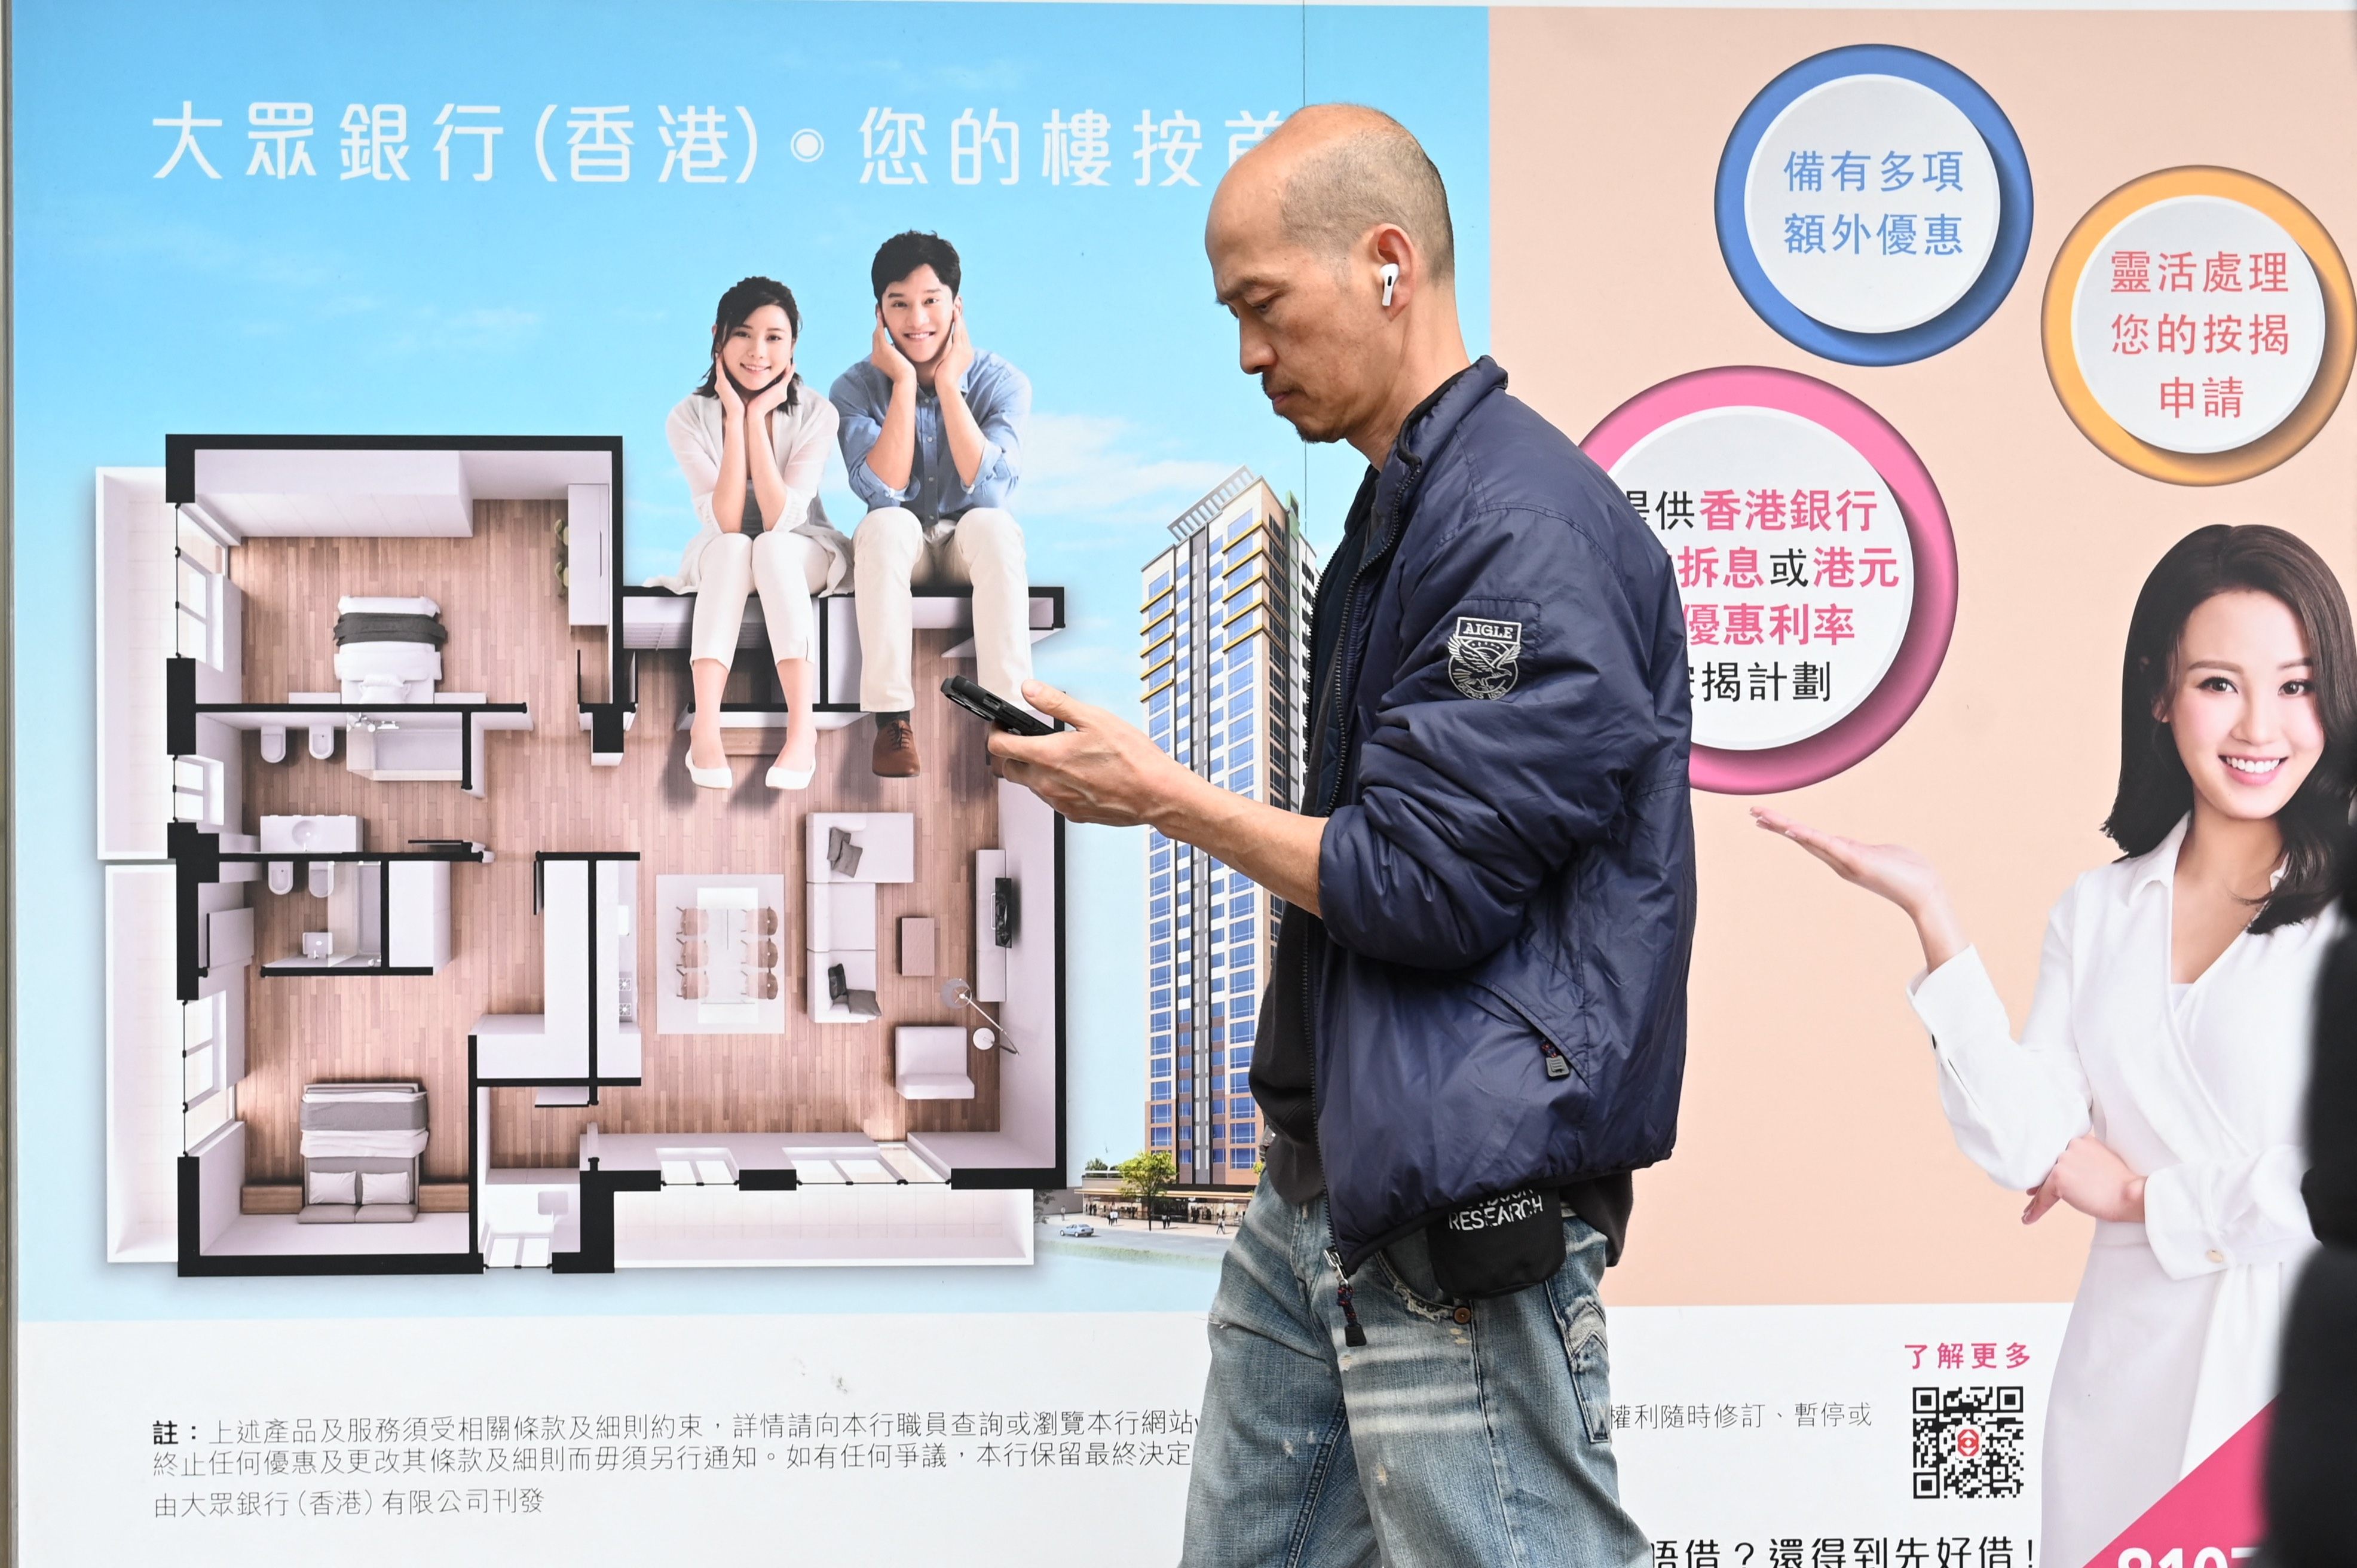 A billboard advertising mortgages is seen in Hong Kong. The city dropped all property curbs last month in a bid to boost buying sentiment. Photo: AFP